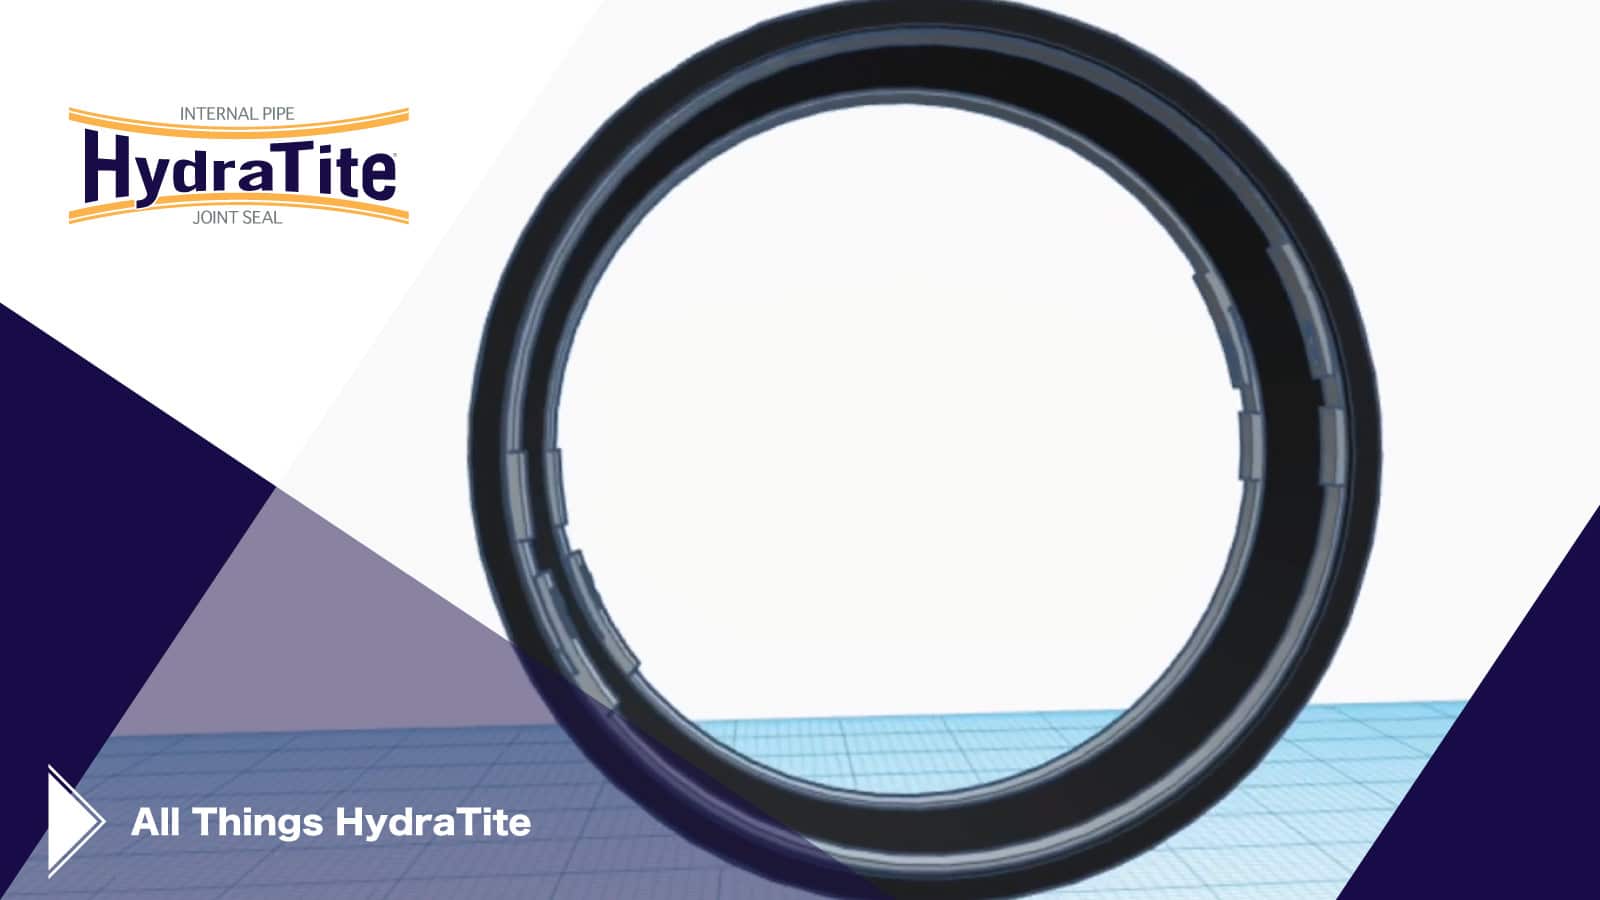 3D rendering of the HydraTite Internal Pipe Joint Seal, 'All Things HydraTite'